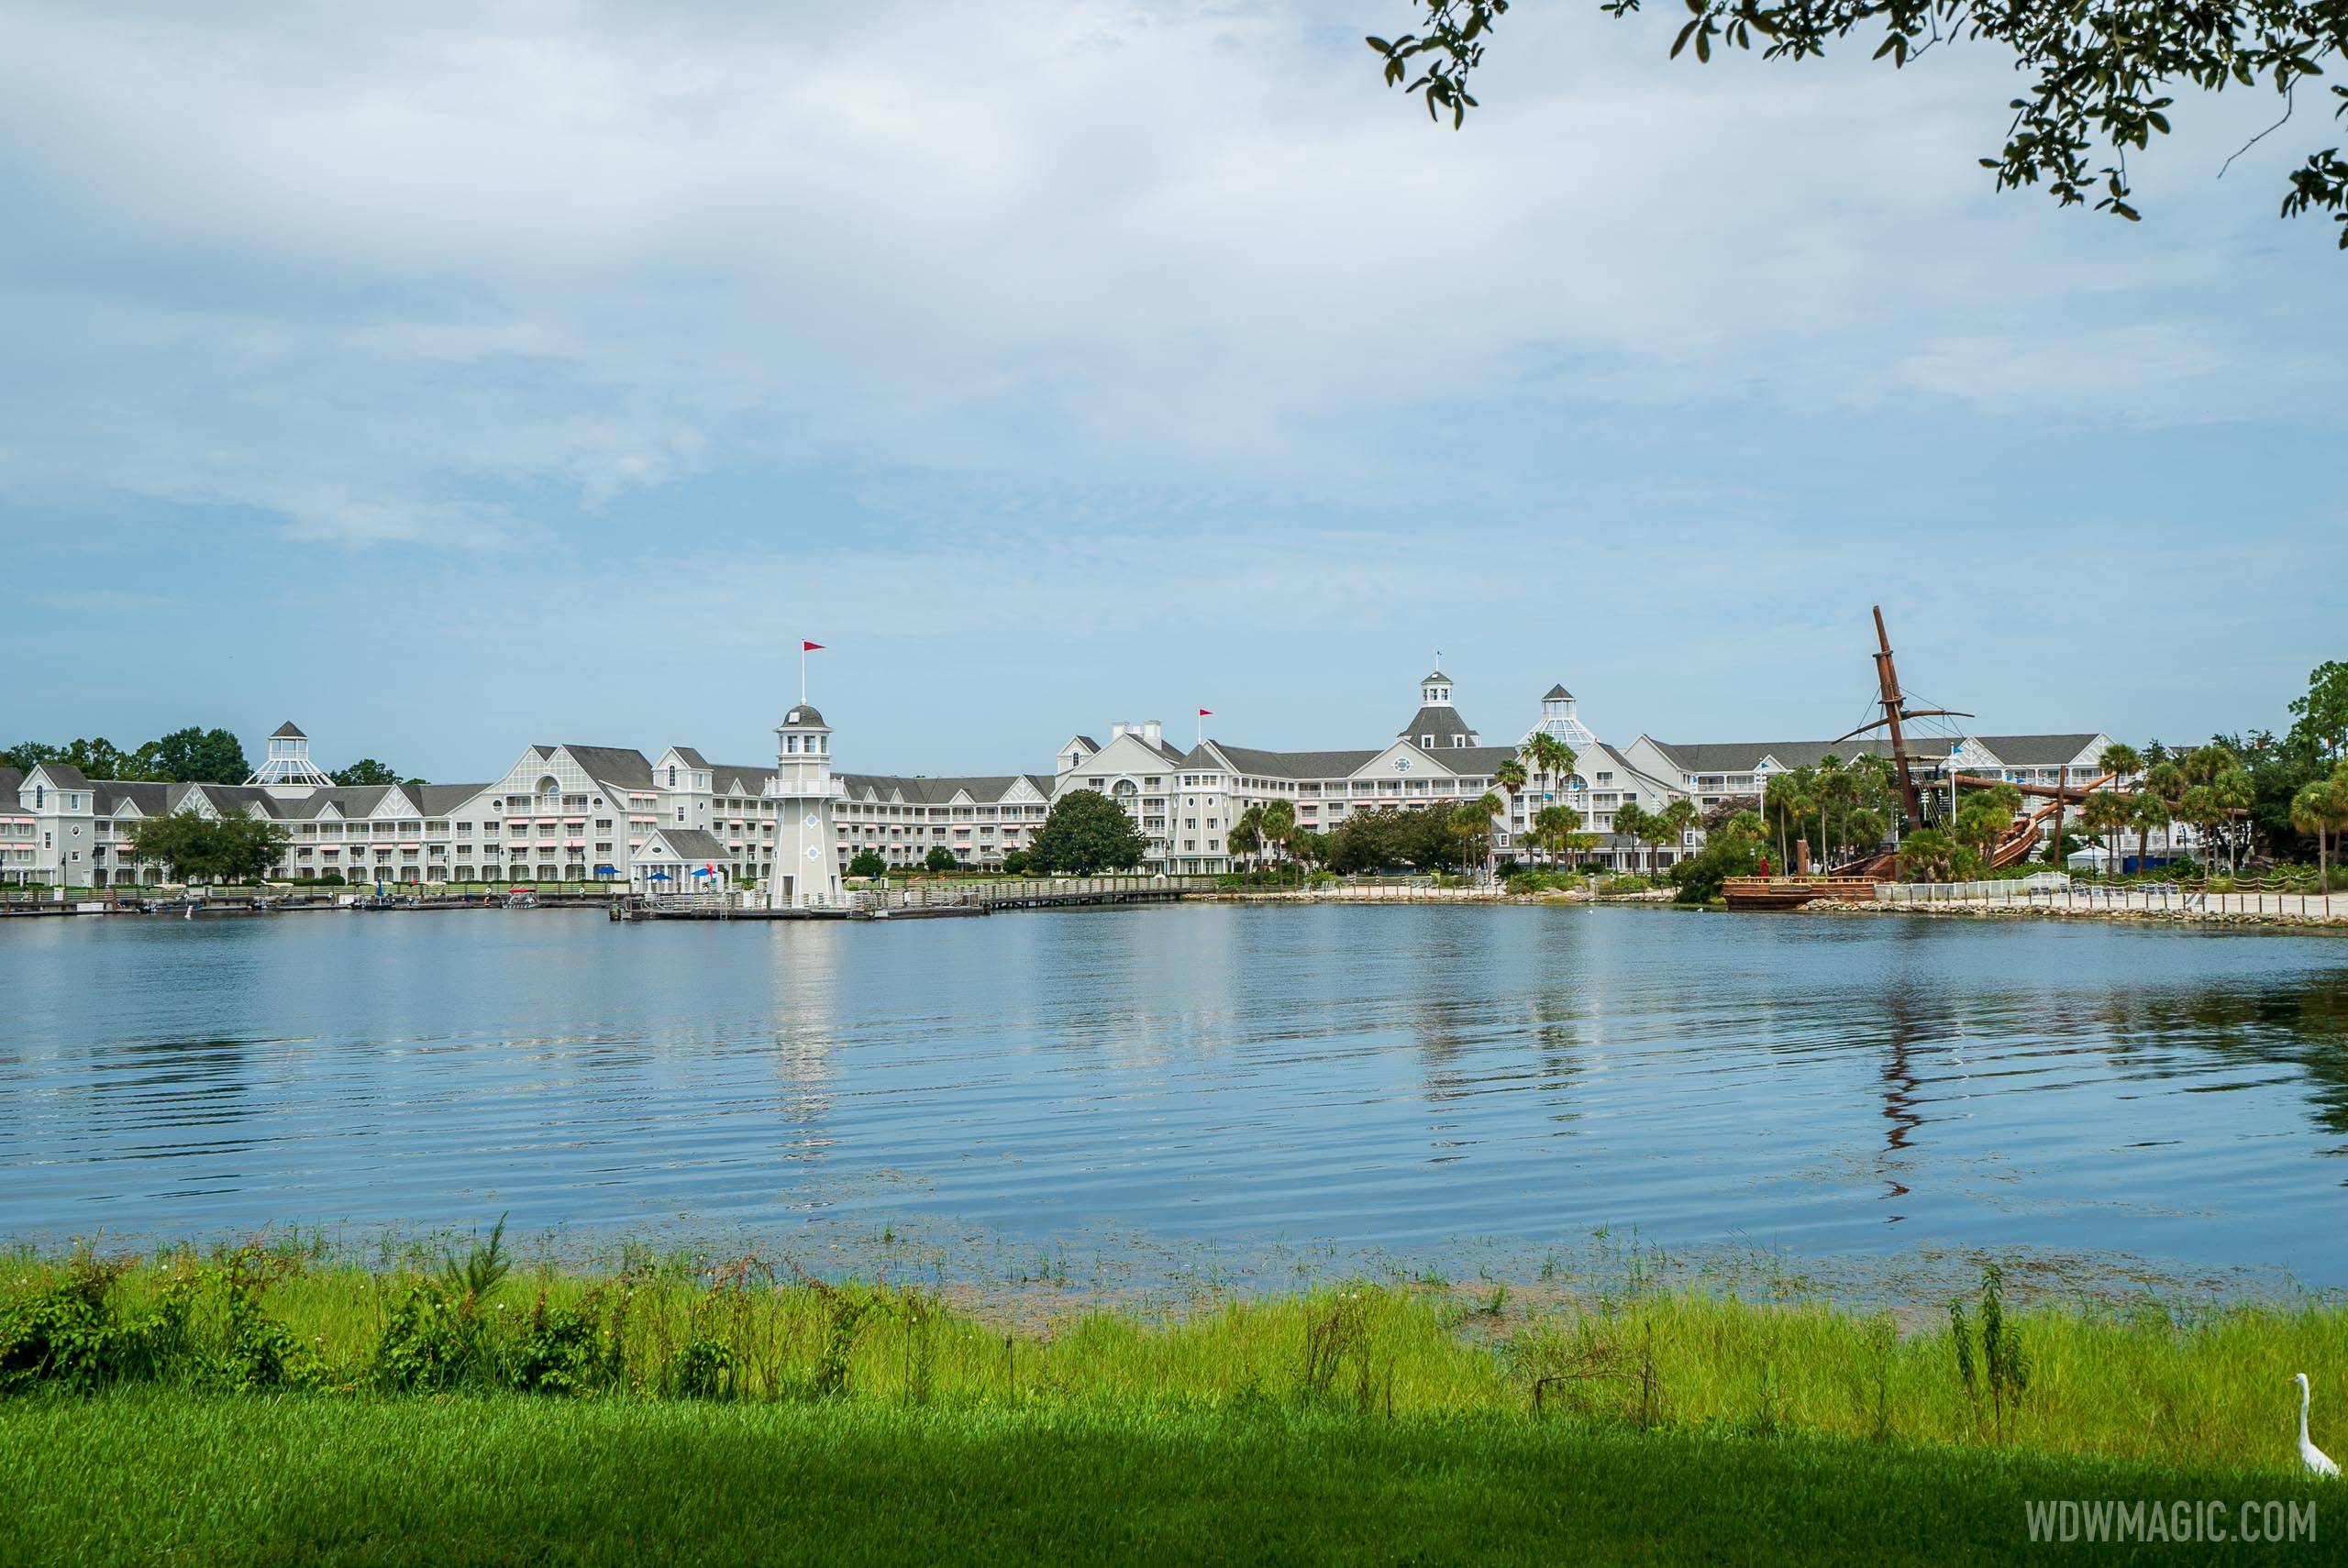 Save up to 30% on rooms at select Disney Resort hotels for stays most nights through July 10 2021.